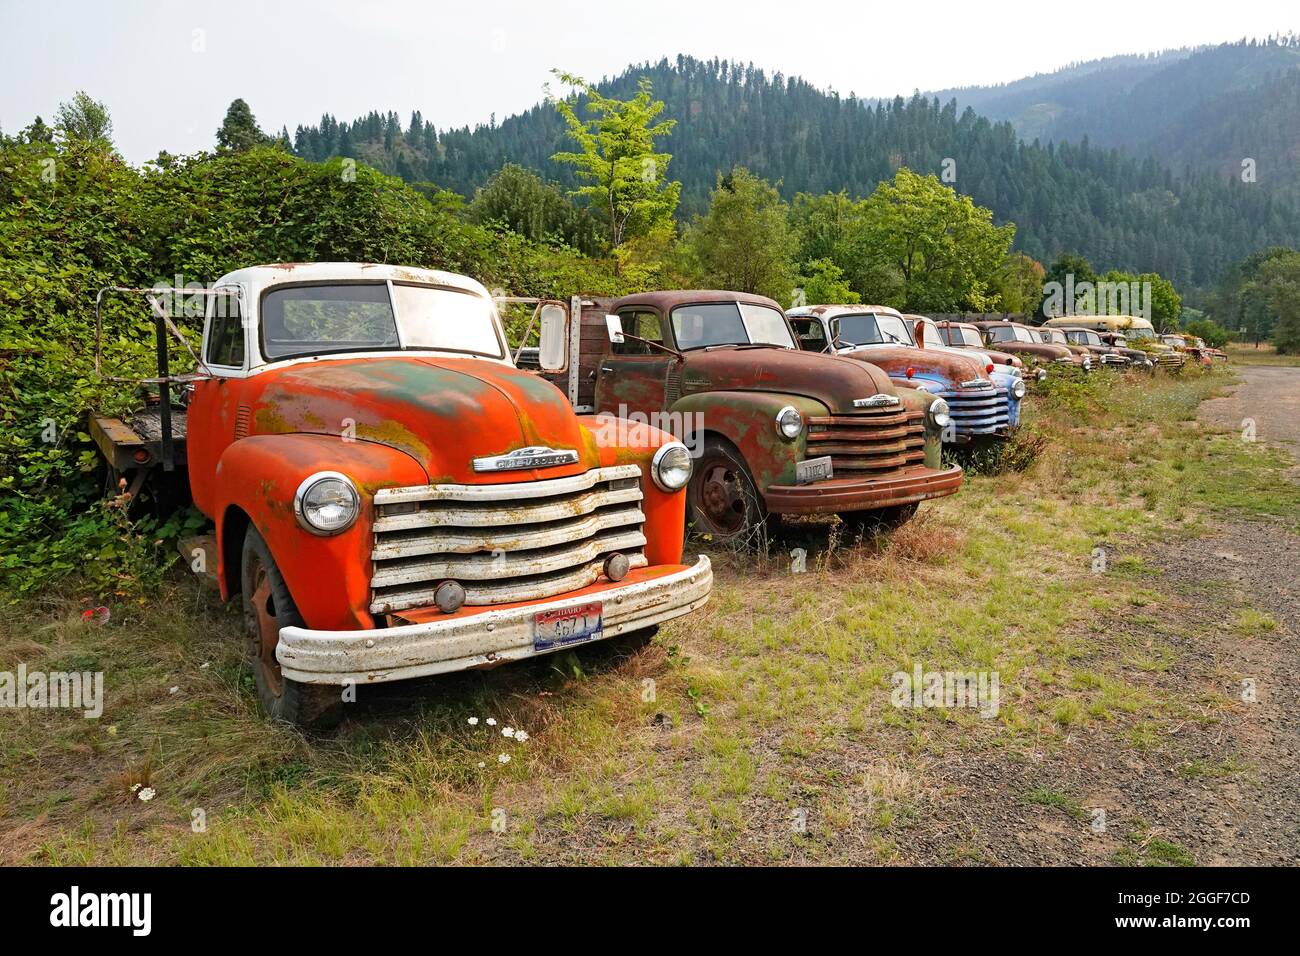 A row of old Chevy and Dodge pickup trucks from the 1950s and 1960s, sitting in a field in the mountains of northern Idaho. Stock Photo